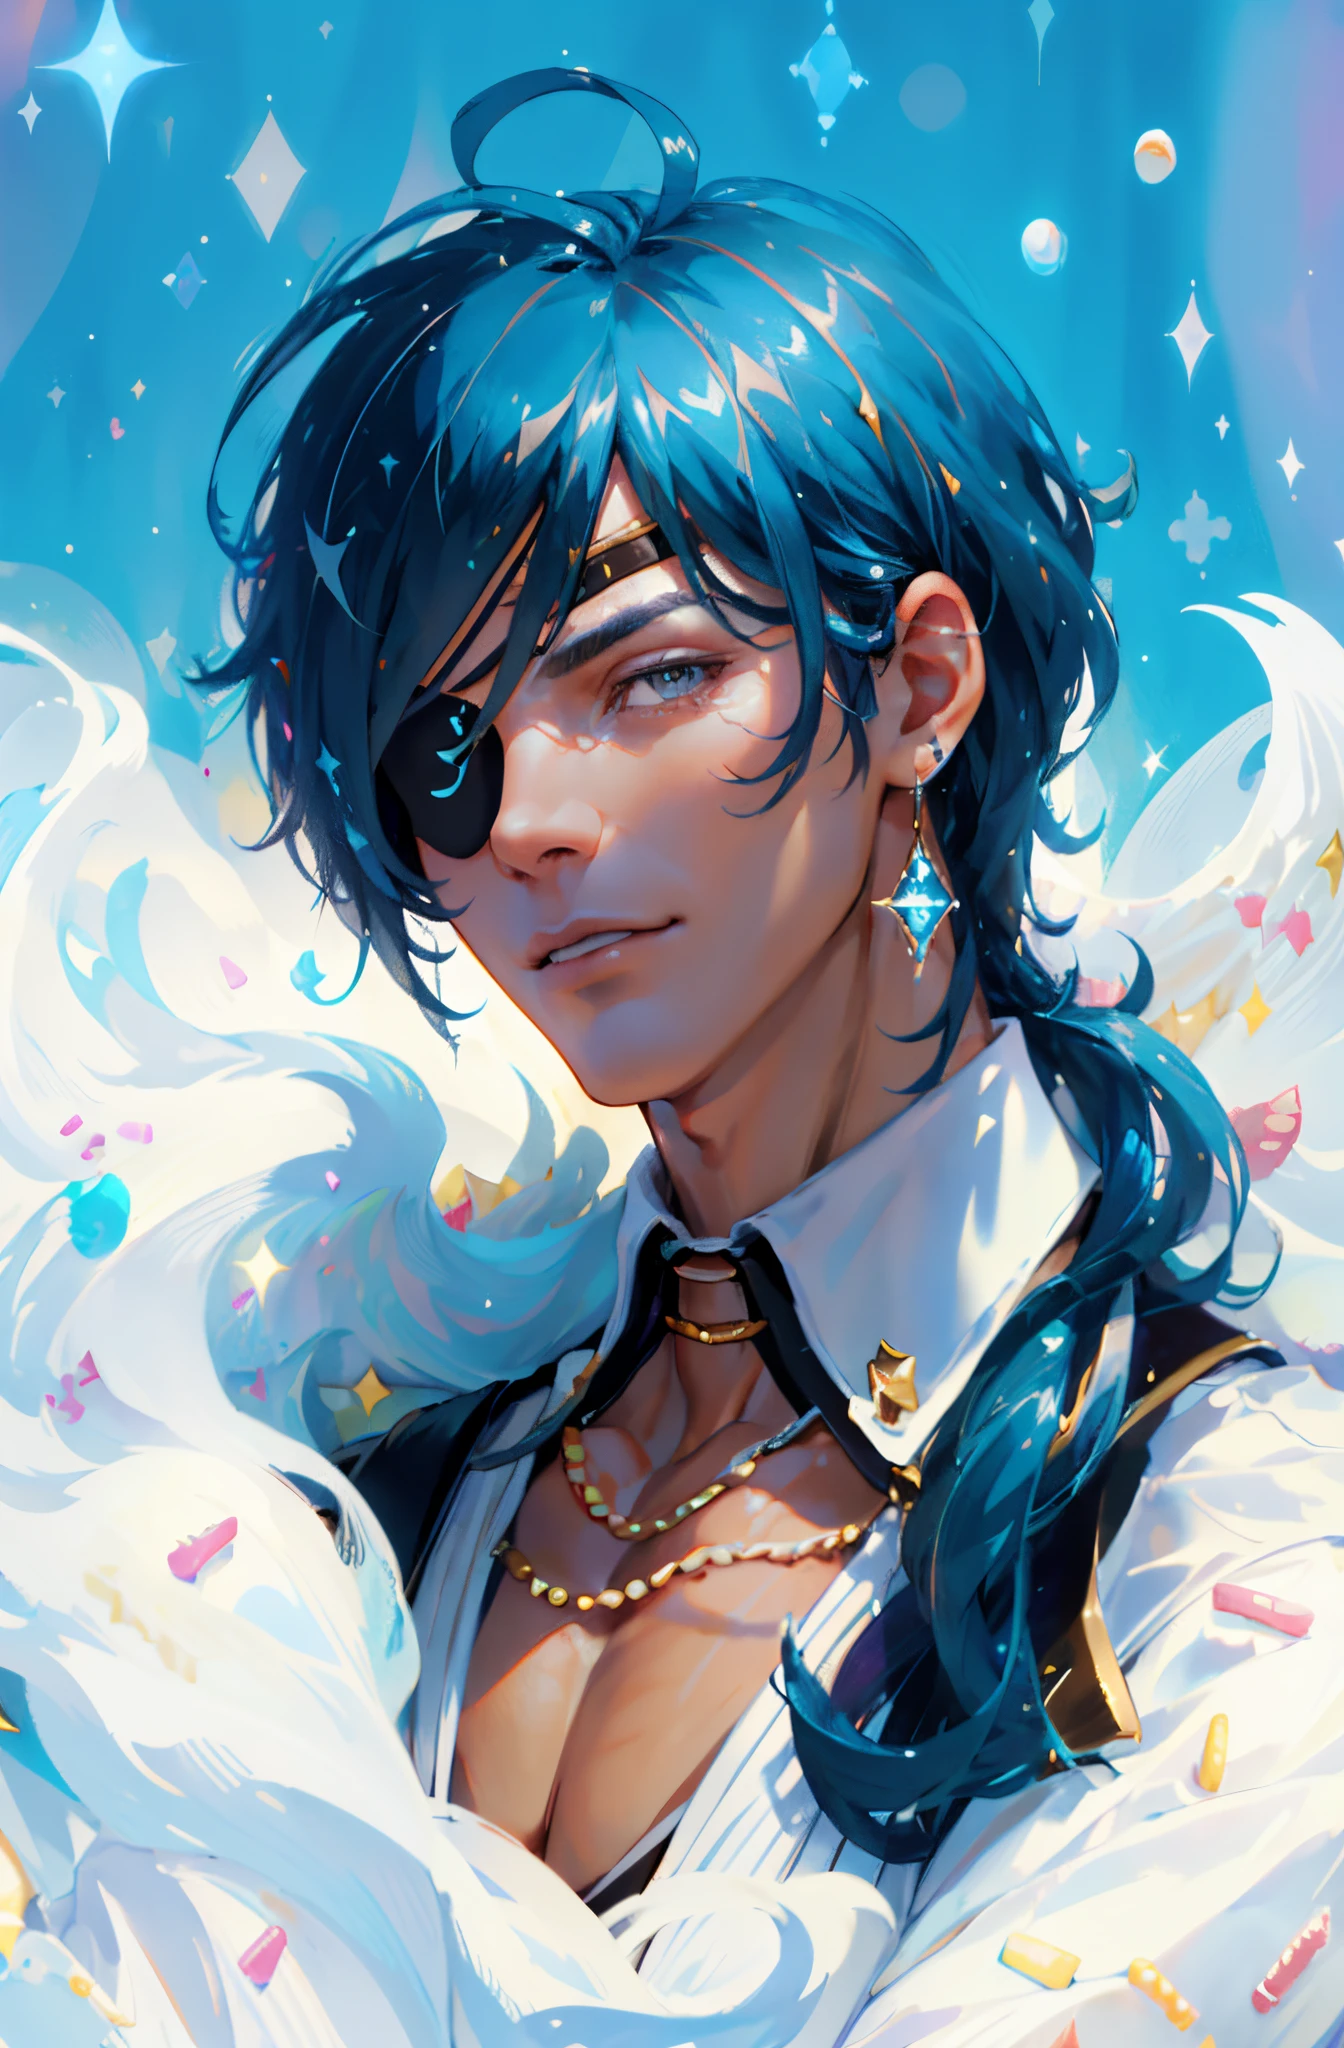 extremely delicate and beautiful, Amazing, finely detail, masterpiece, ultra-detailed, highres,best illustration, best shadow,intricate,sharp focus, high quality, 1 male solo, mature, handsome, tall muscular guy, broad shoulders, blue hair flowing with the wind, blue right eye, black eyepatch, ((whipped cream with sprinkles, dessert, icecream, cake, sparkles))